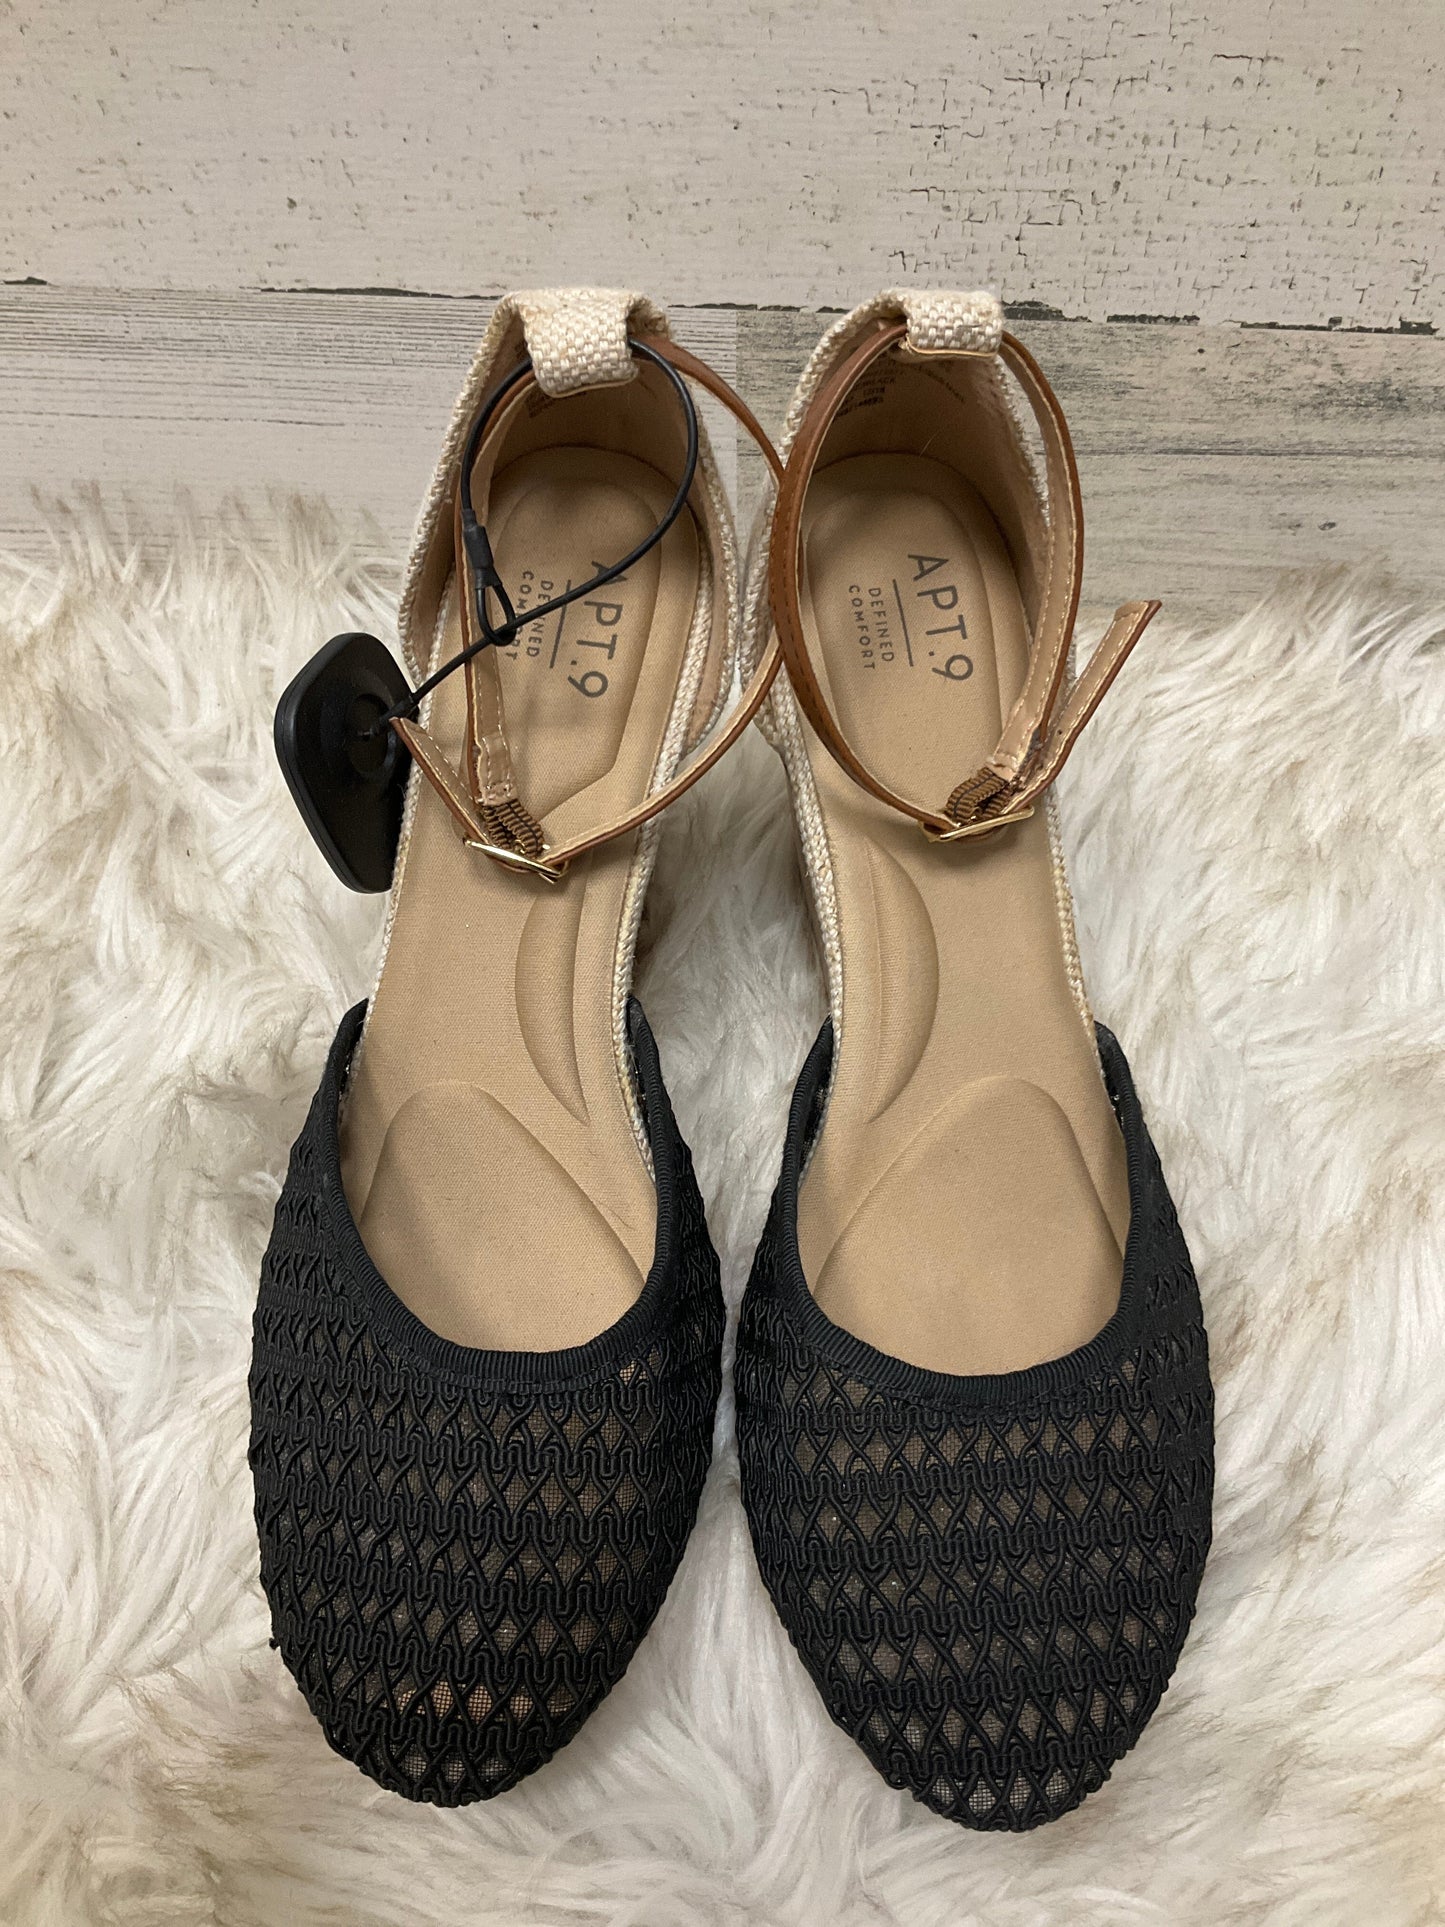 Shoes Heels Espadrille Wedge By Apt 9  Size: 9